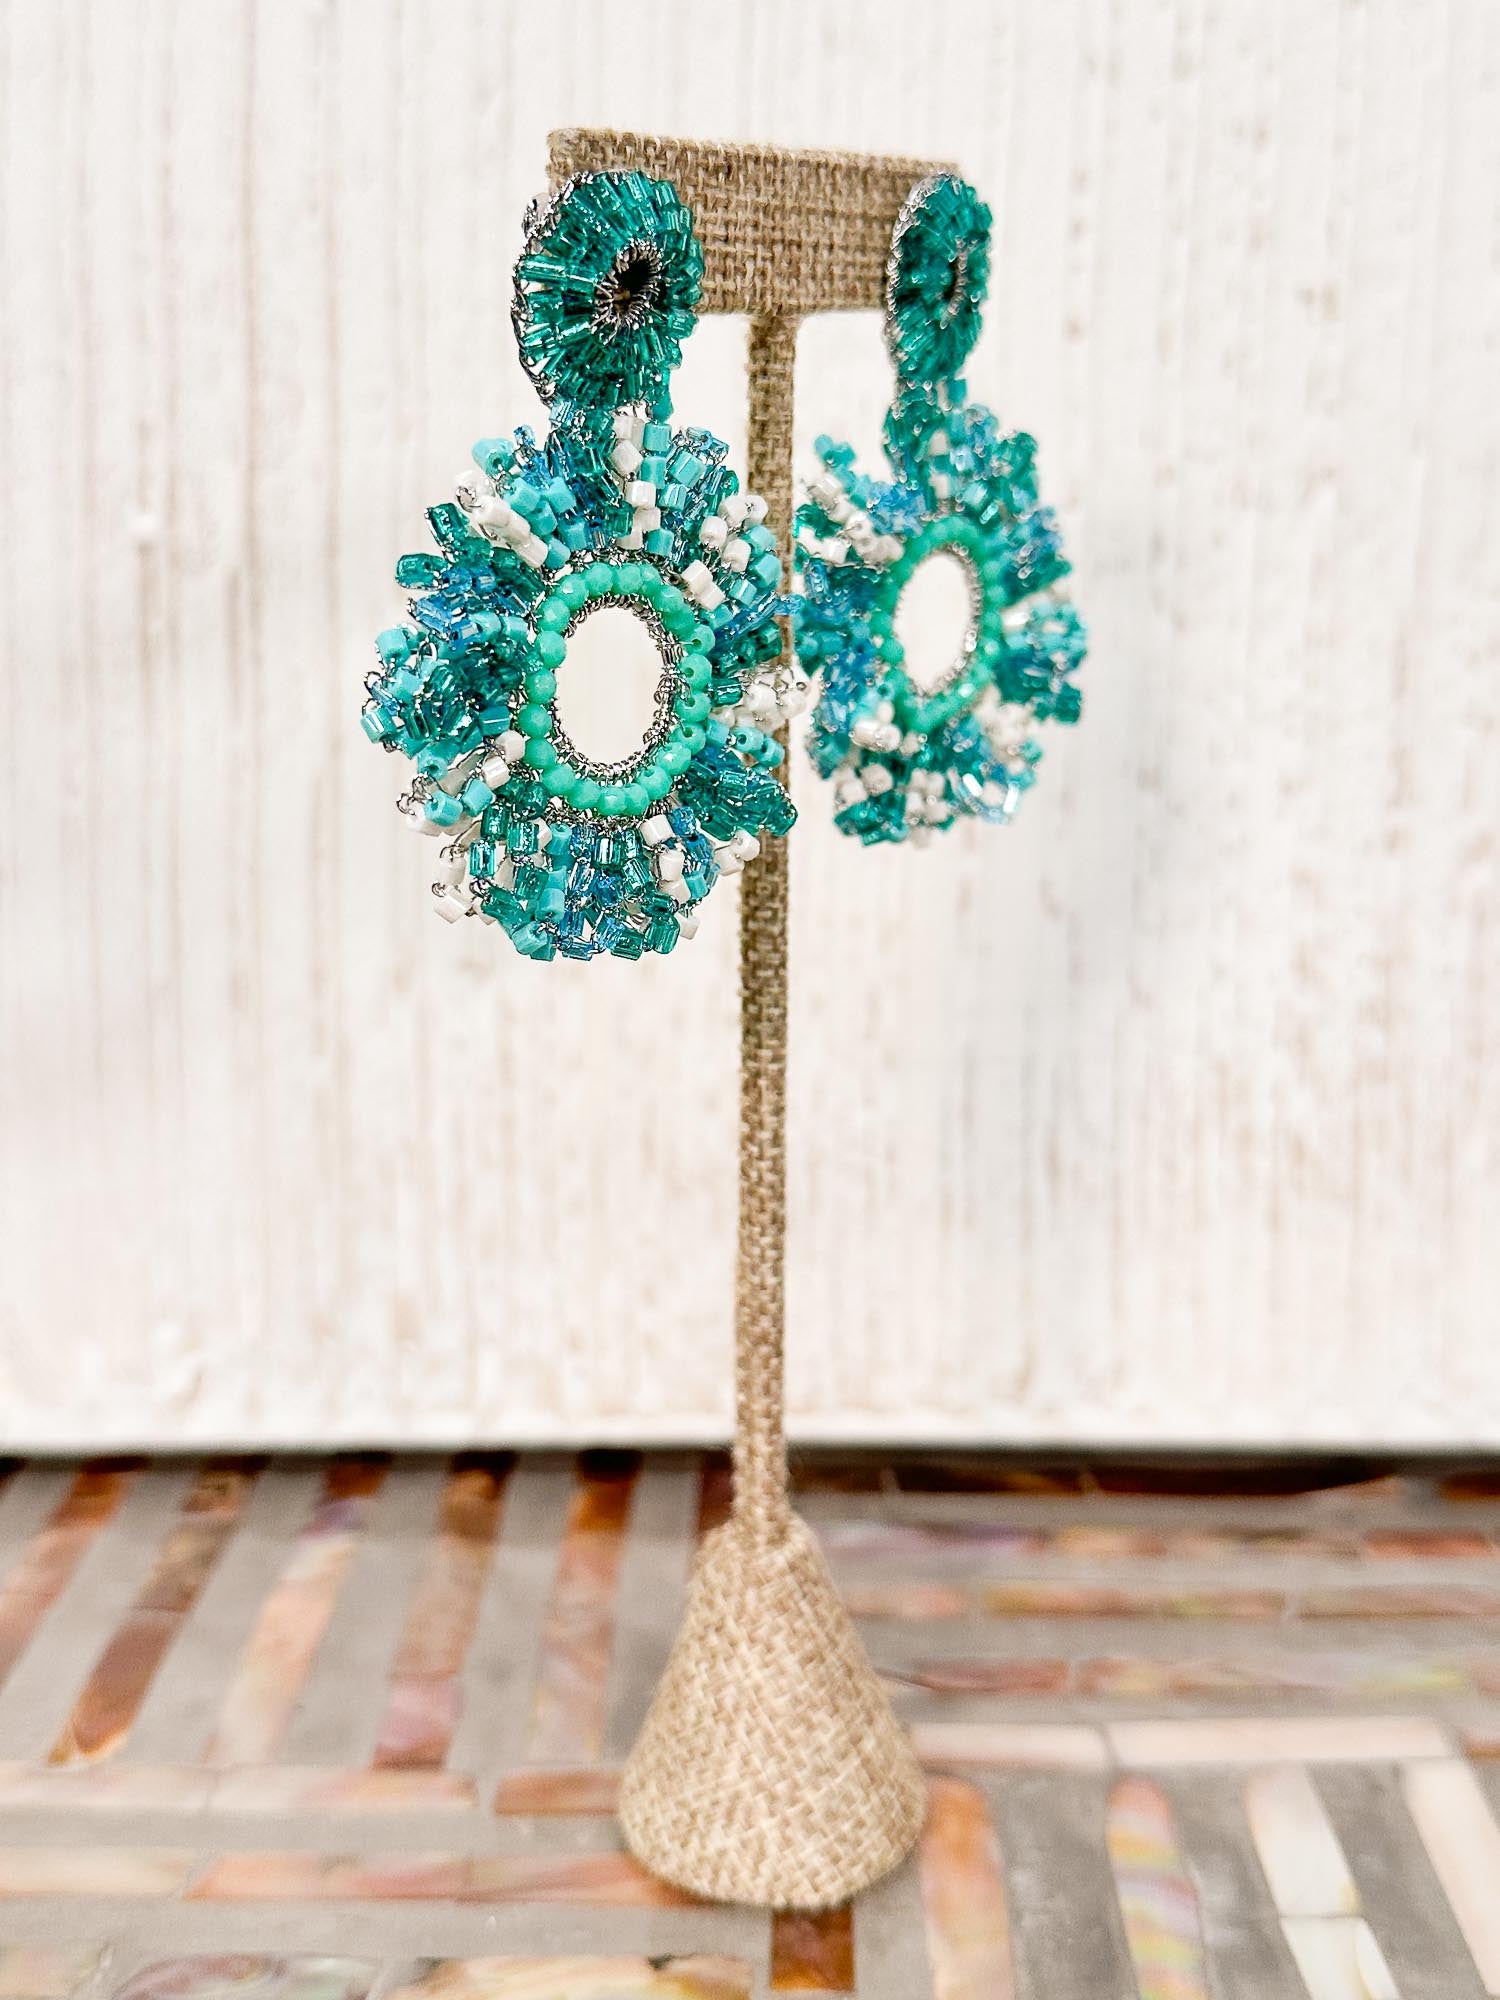 Lavish by Tricia Milaneze Marigold Earrings, Silver Teal Mix - Statement Boutique